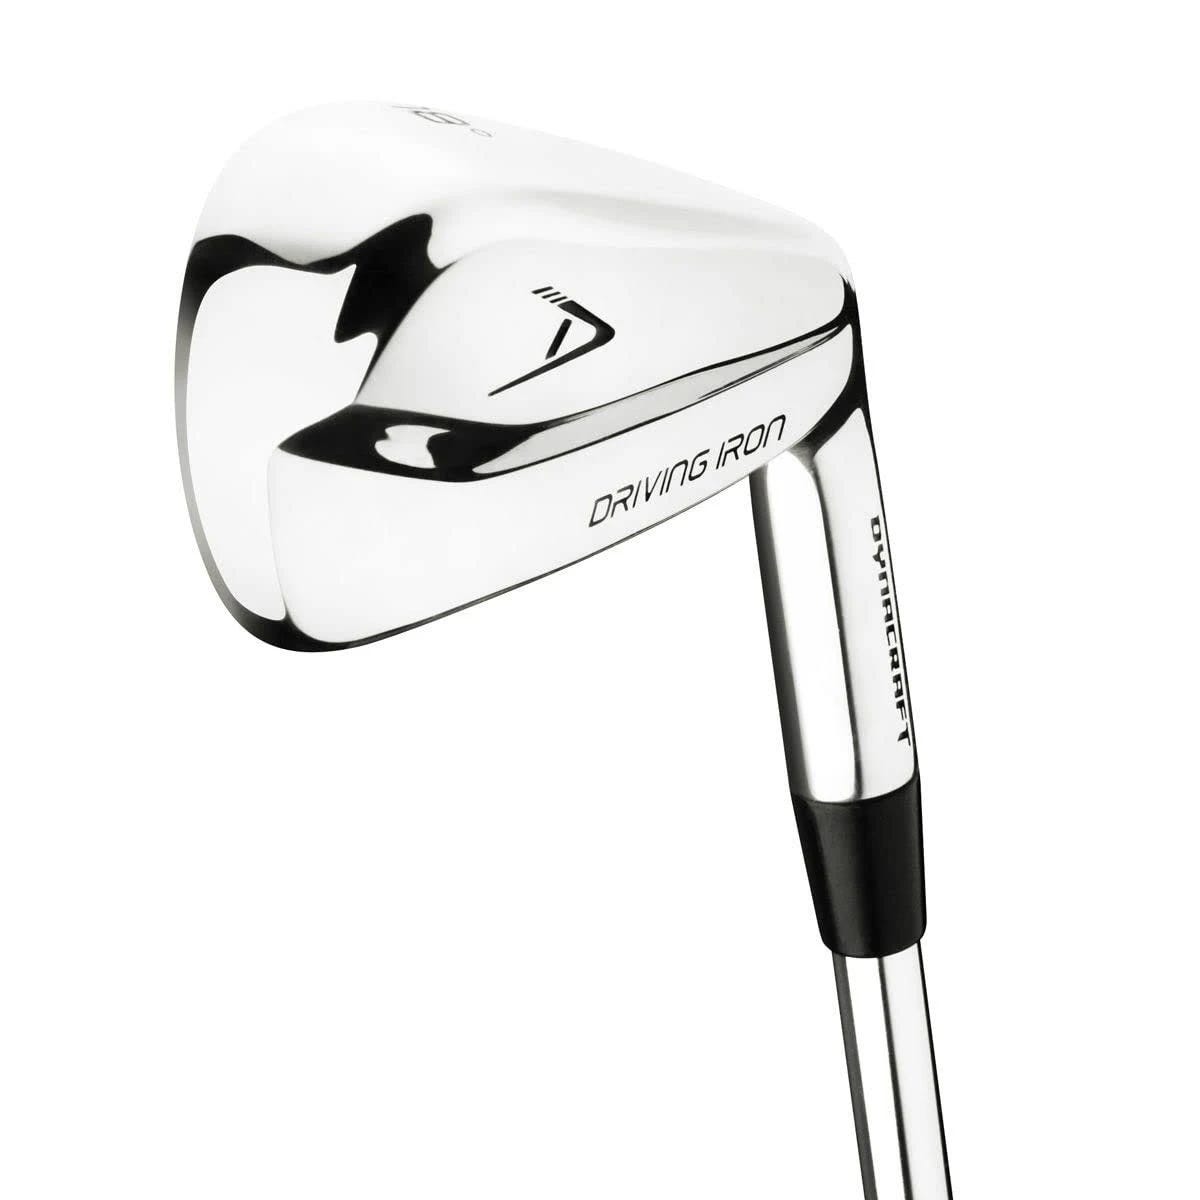 Premium Dynacraft Driving Iron for Enhanced Control and Trajectory | Image